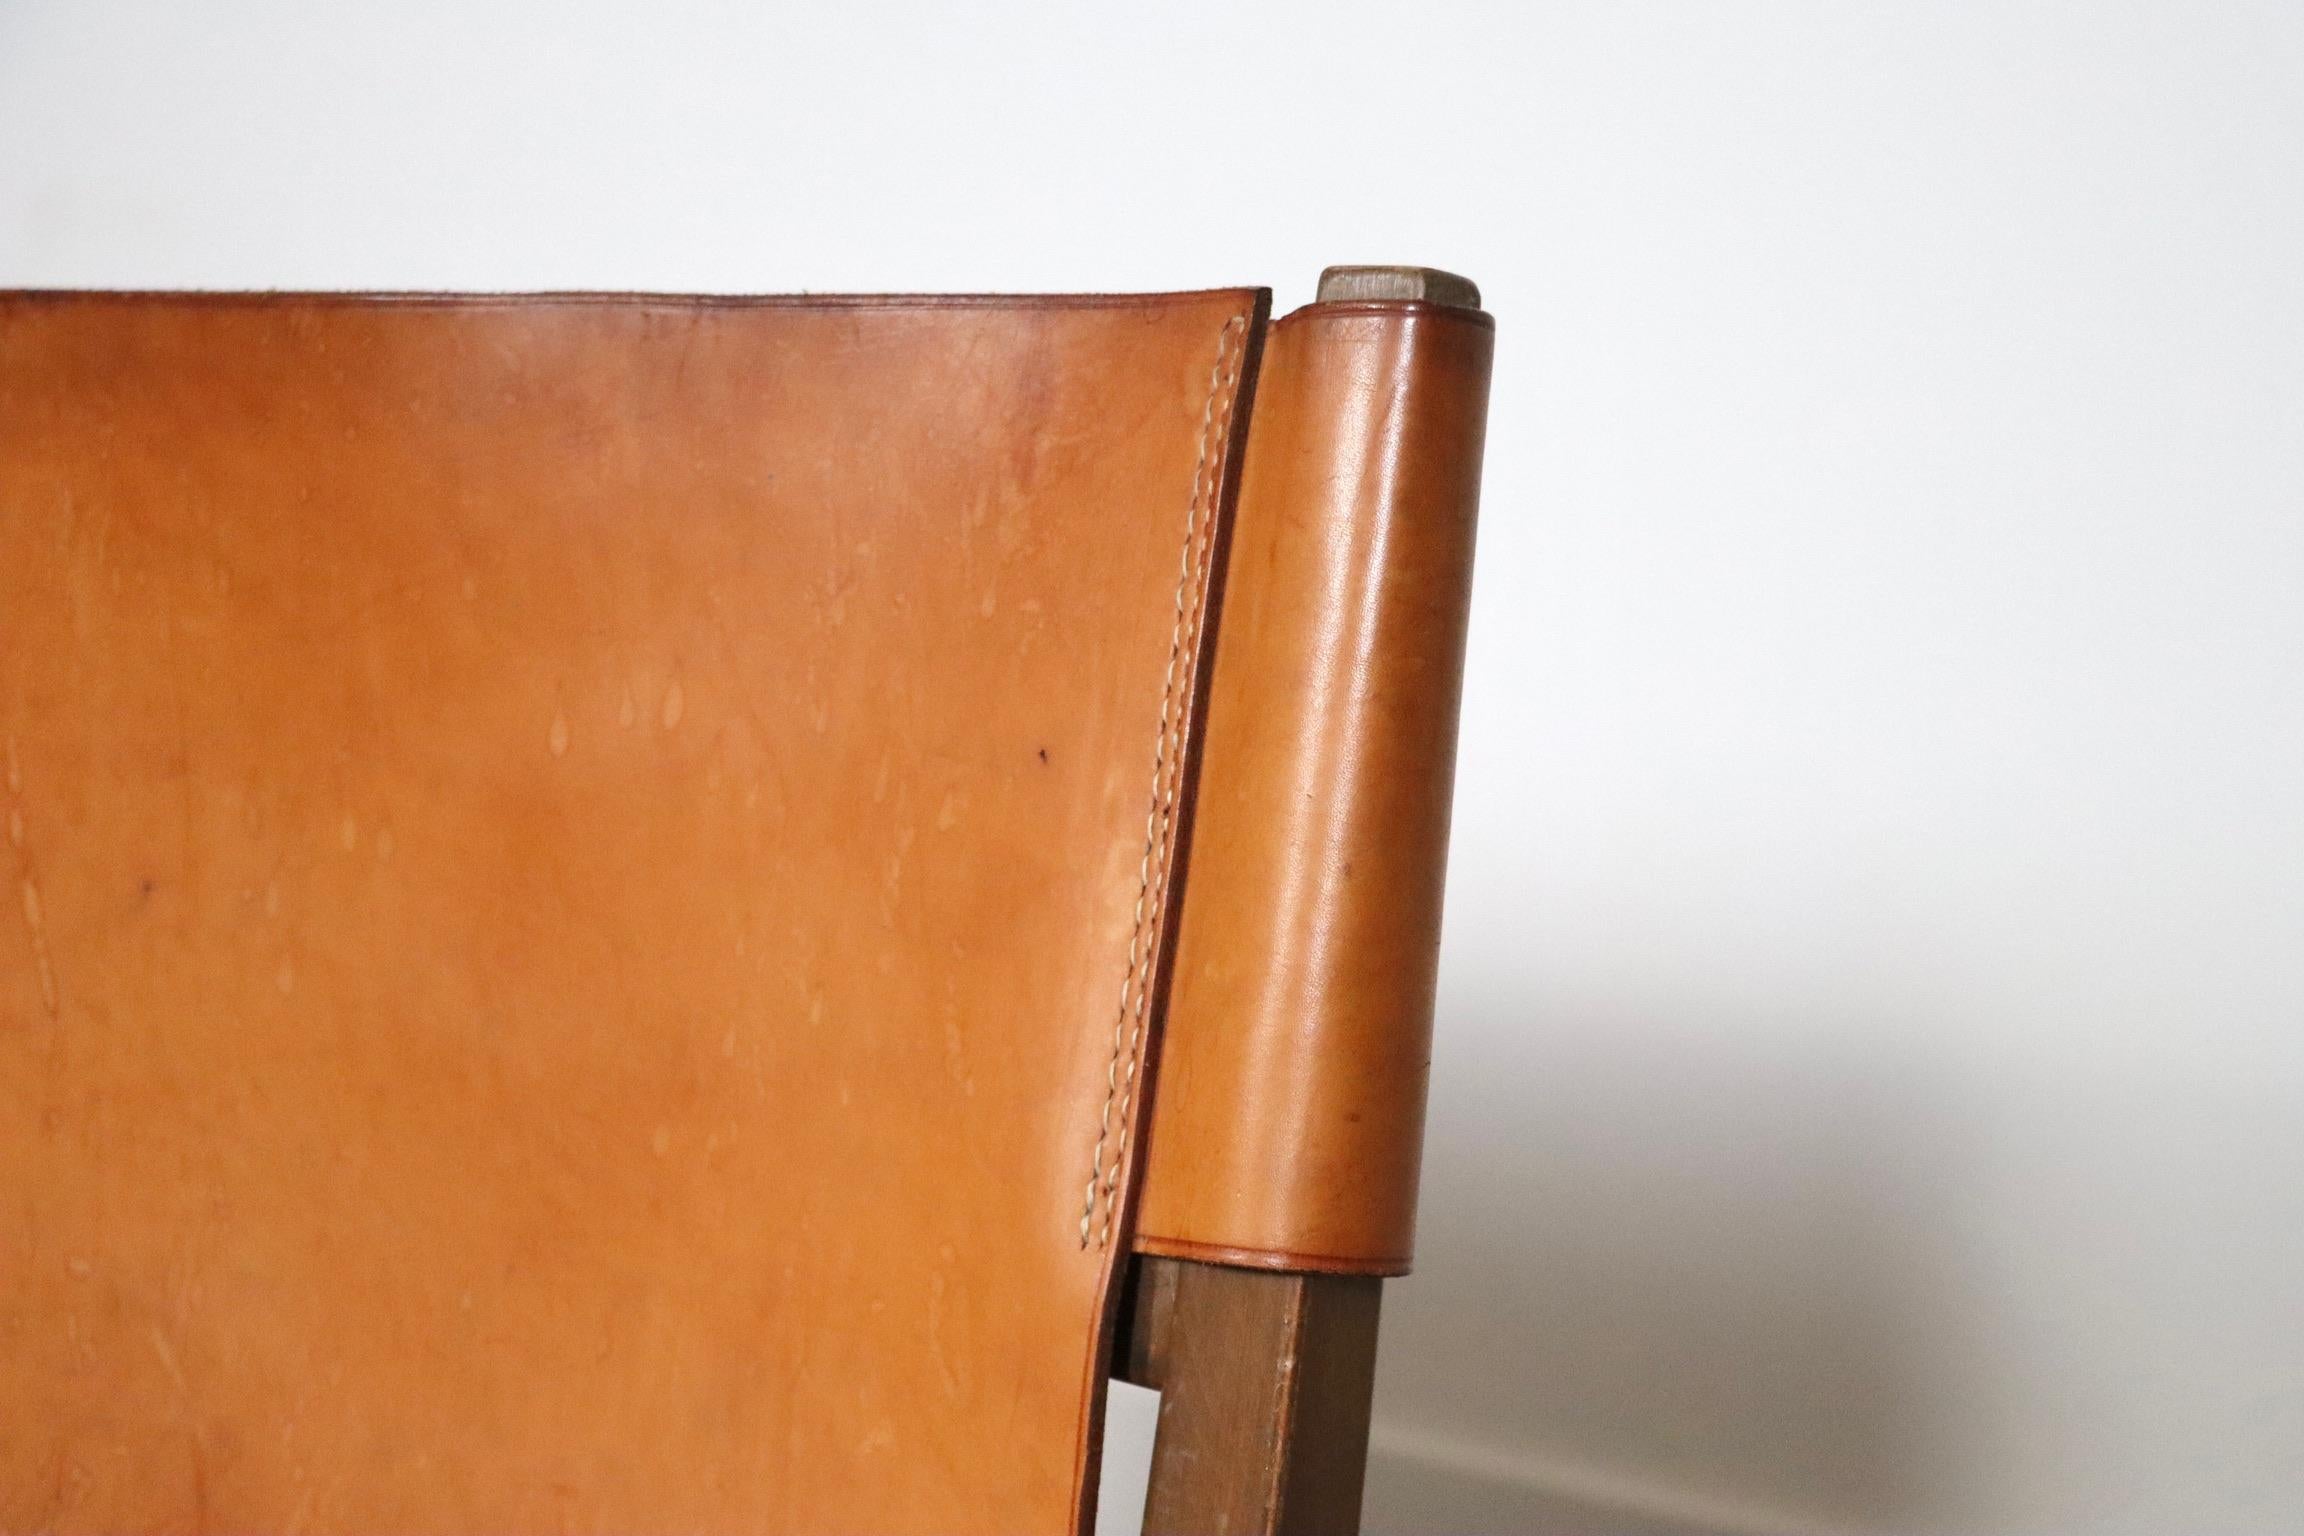 Pair Of Riaza Chairs In Cognac Leather By Paco Muñoz For Darro Gallery, Spain, 1 For Sale 4